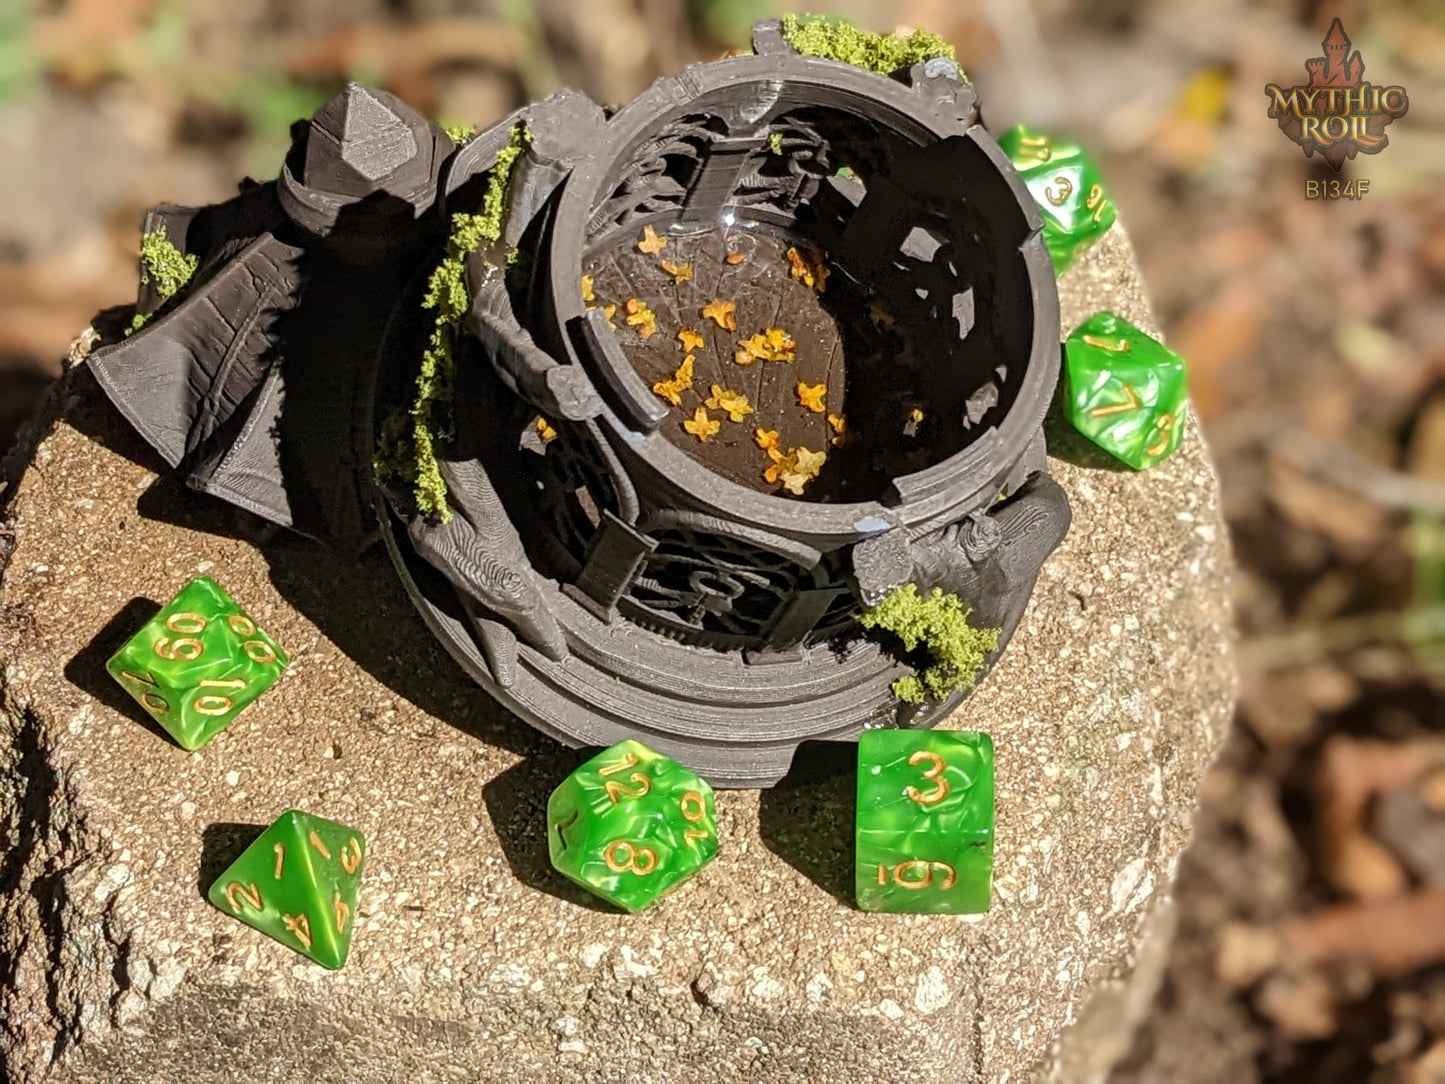 Elanor's Garden 3D Printed Dice Jail | RPG Dice Vault | D20 Storage Box | Player Gift - Mythic Roll Collection by Unchained Games.